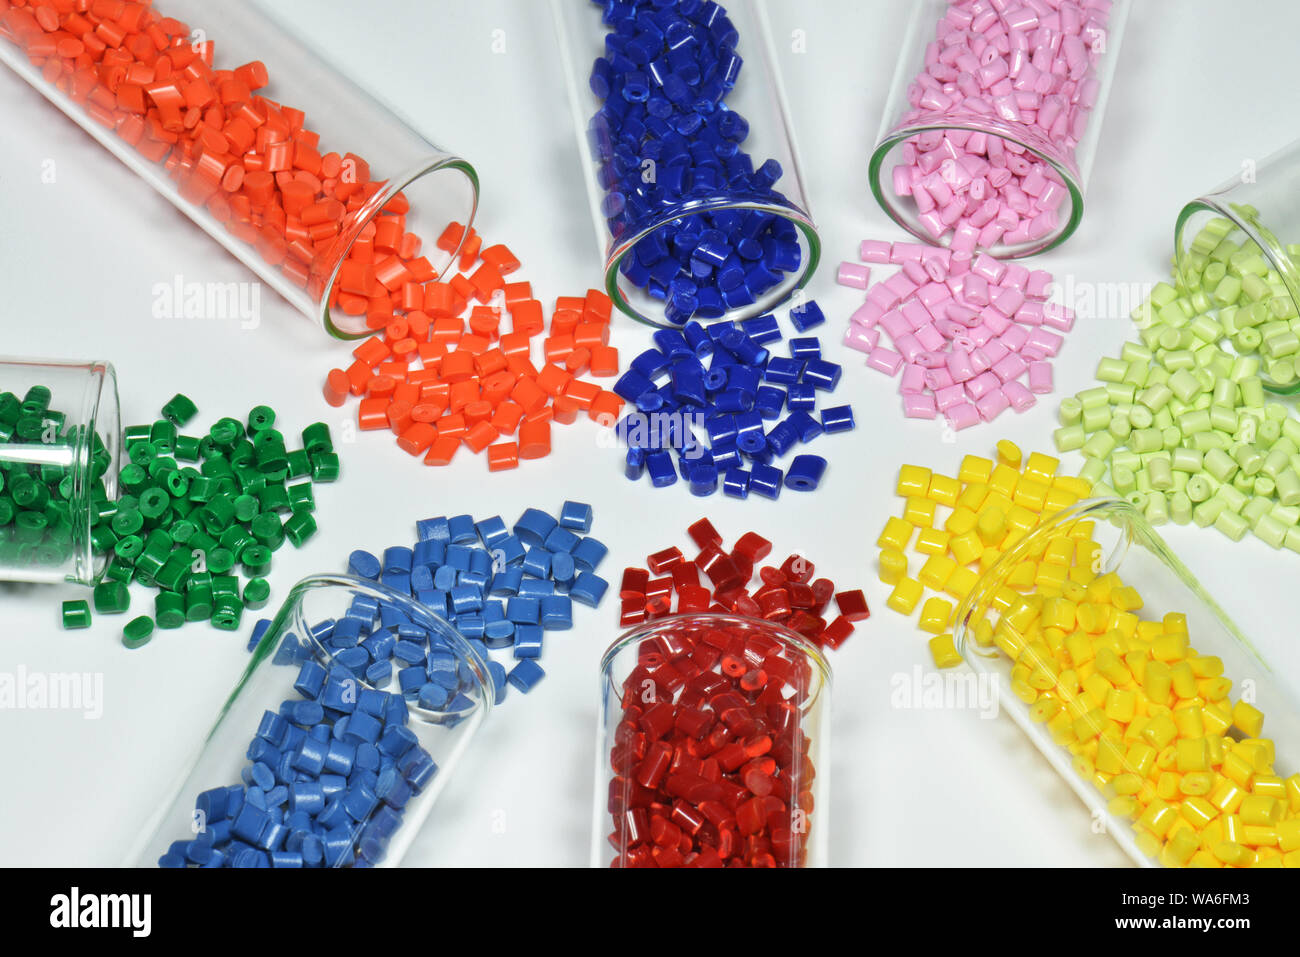 dyed plastic resin for injection molding industry in laboratory Stock Photo